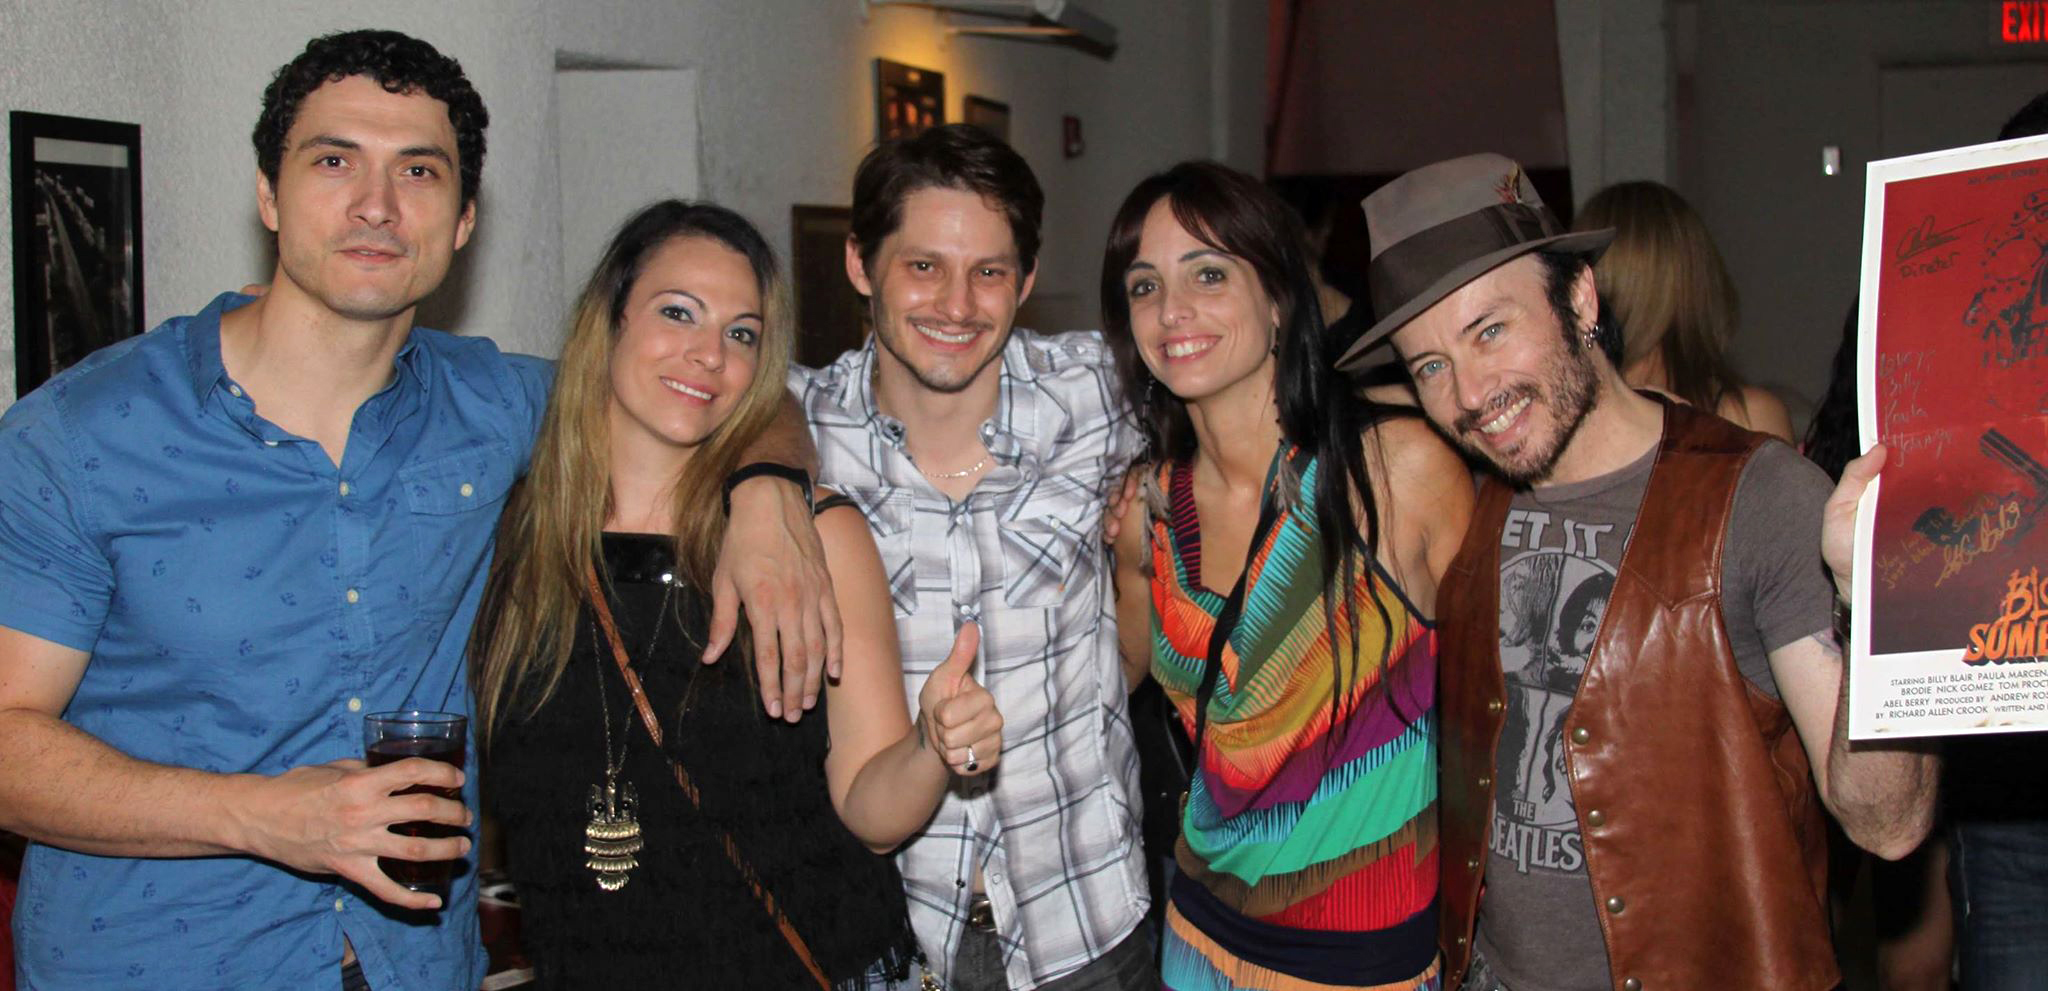 Abel Berry, Jenn Stone, Stephen Brodie, Paula Marcenaro Solinger, and Billy Blair at an event for Blood Sombrero